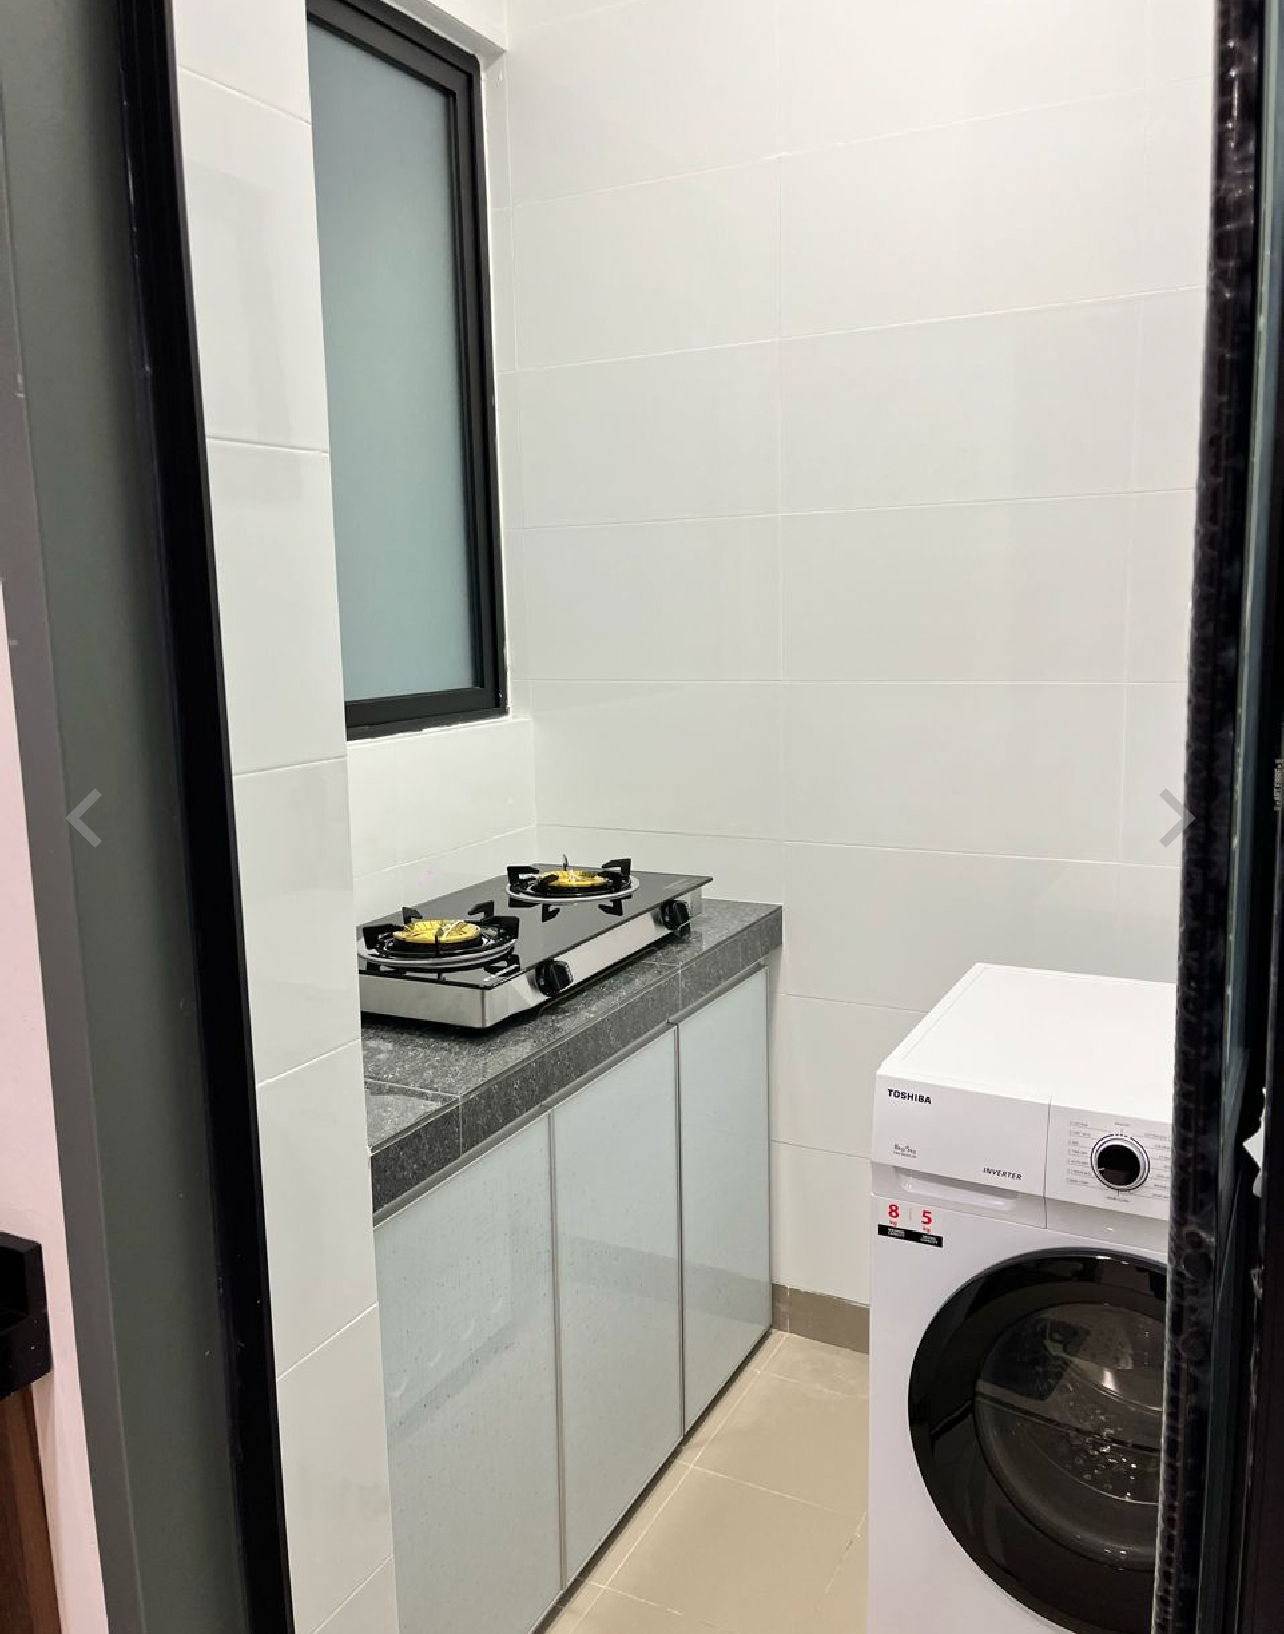 room for rent, studio, malacca international trade centre, Send the owner a message on WhatsApp/facebook if you want to RENT the unit(Mohammed Nhat)&Telegram(@muhammednhat101)